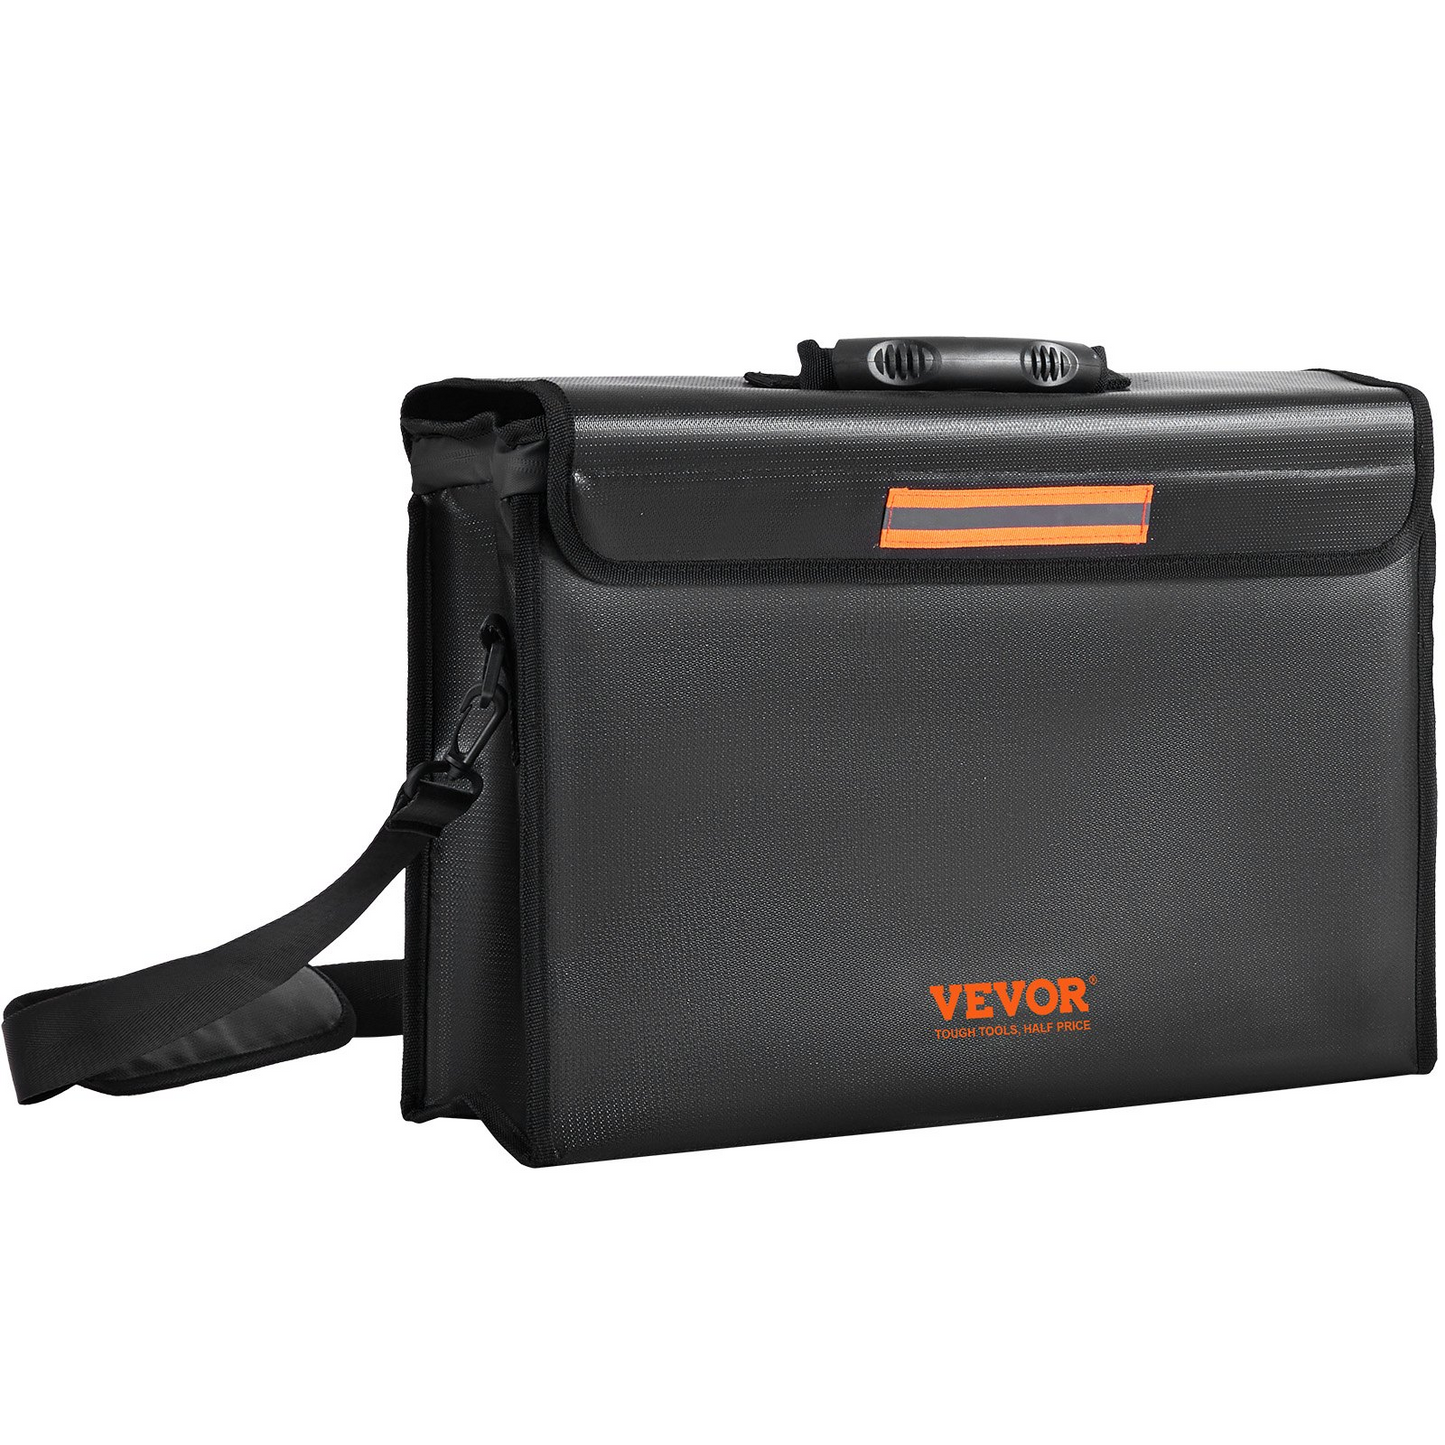 VEVOR Fireproof Document Box, Fireproof Document Bag  2000℉, 3-layer Folding Fireproof and Waterproof File Box 15.35x12.4x13.98 inch with Zipper, for Money, Documents, Jewelry and Passport, Goodies N Stuff